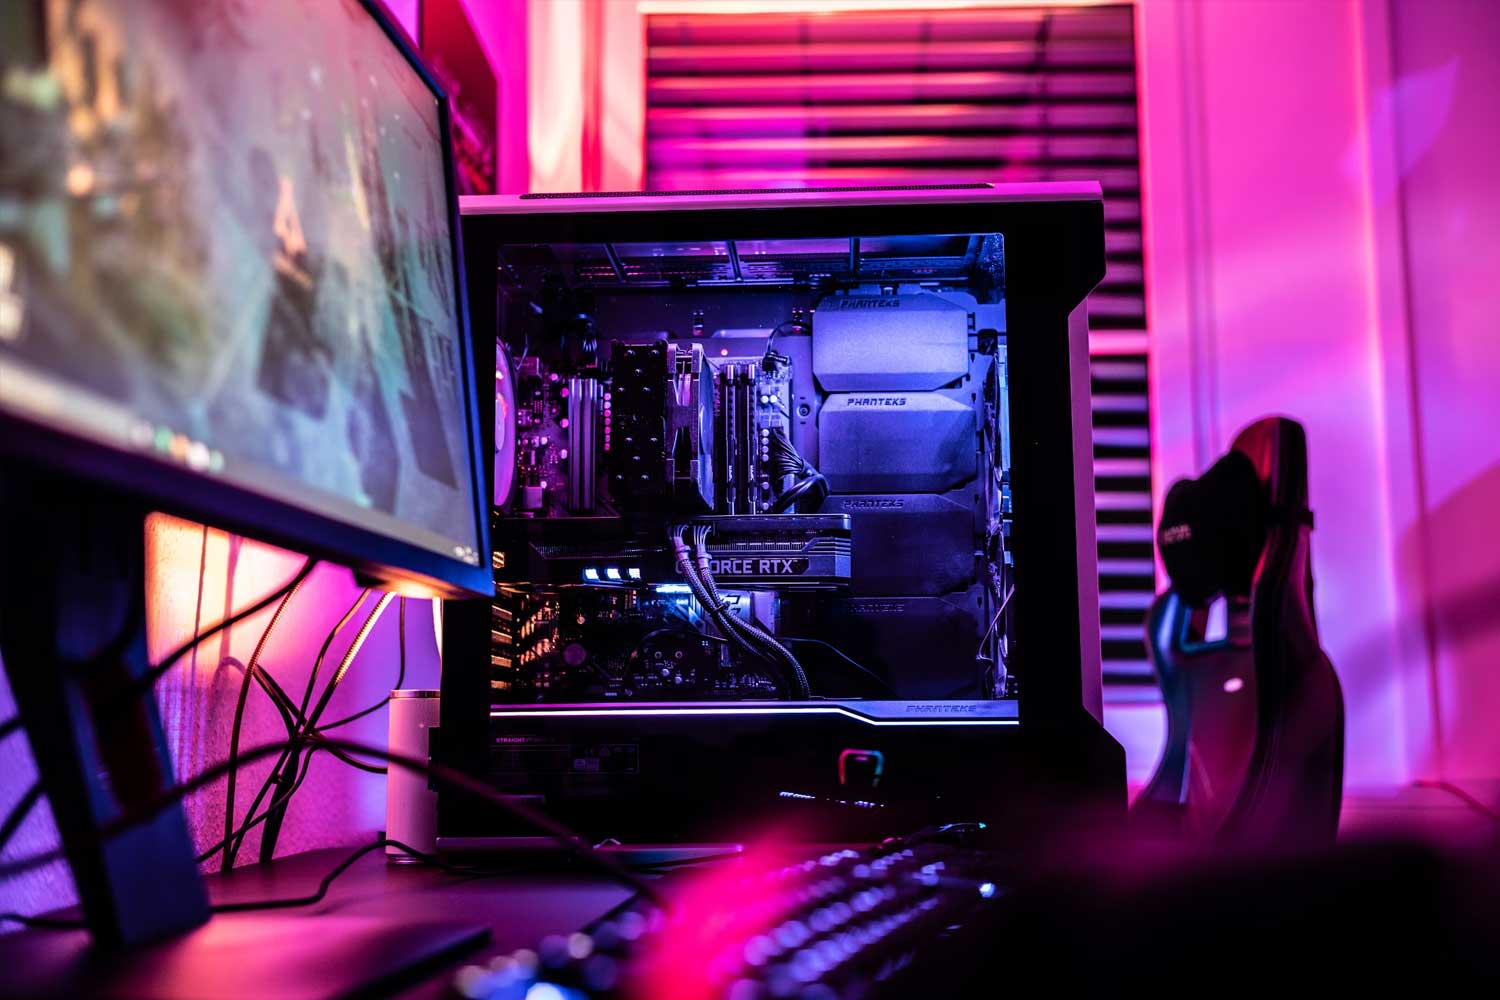 Best Memorial Day gaming PC deals: Get a gaming PC for just $880